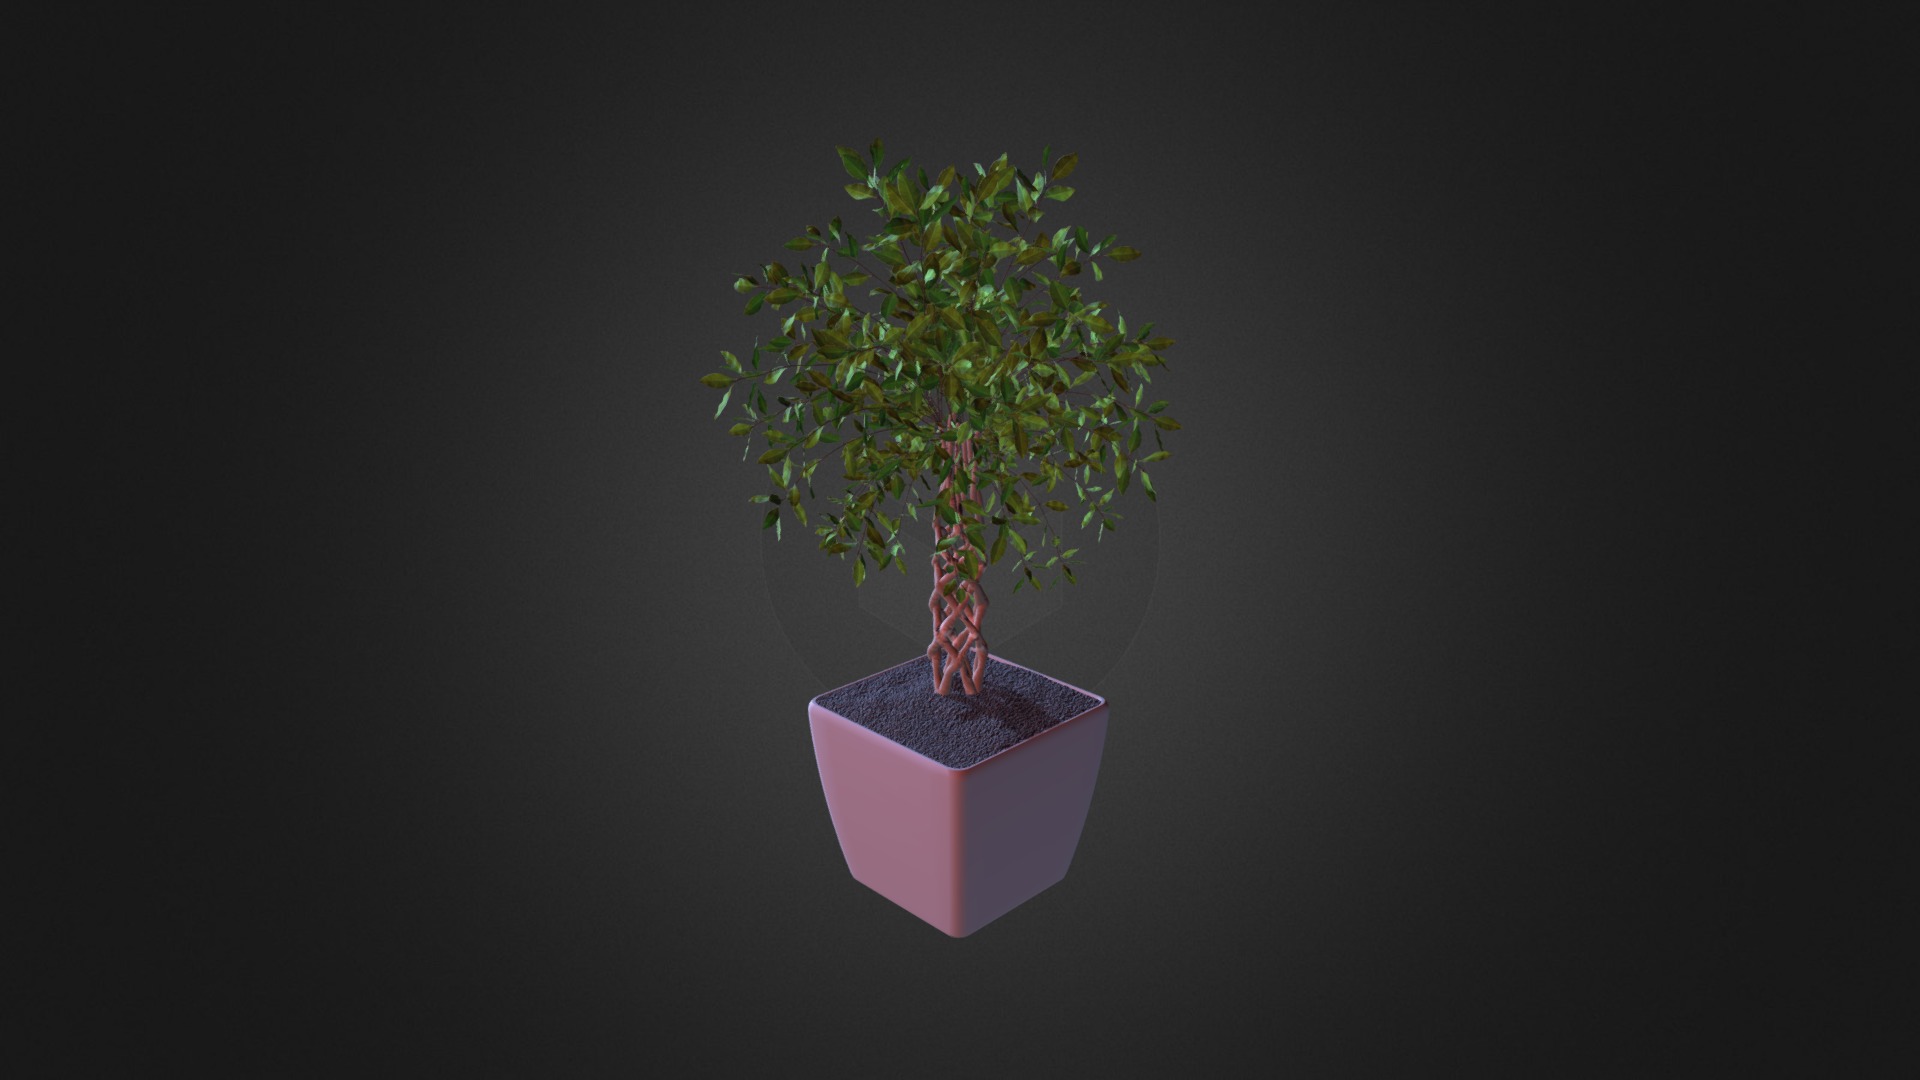 3D model Convexshapes Potted Plant 13 - This is a 3D model of the Convexshapes Potted Plant 13. The 3D model is about a small tree on a purple box.